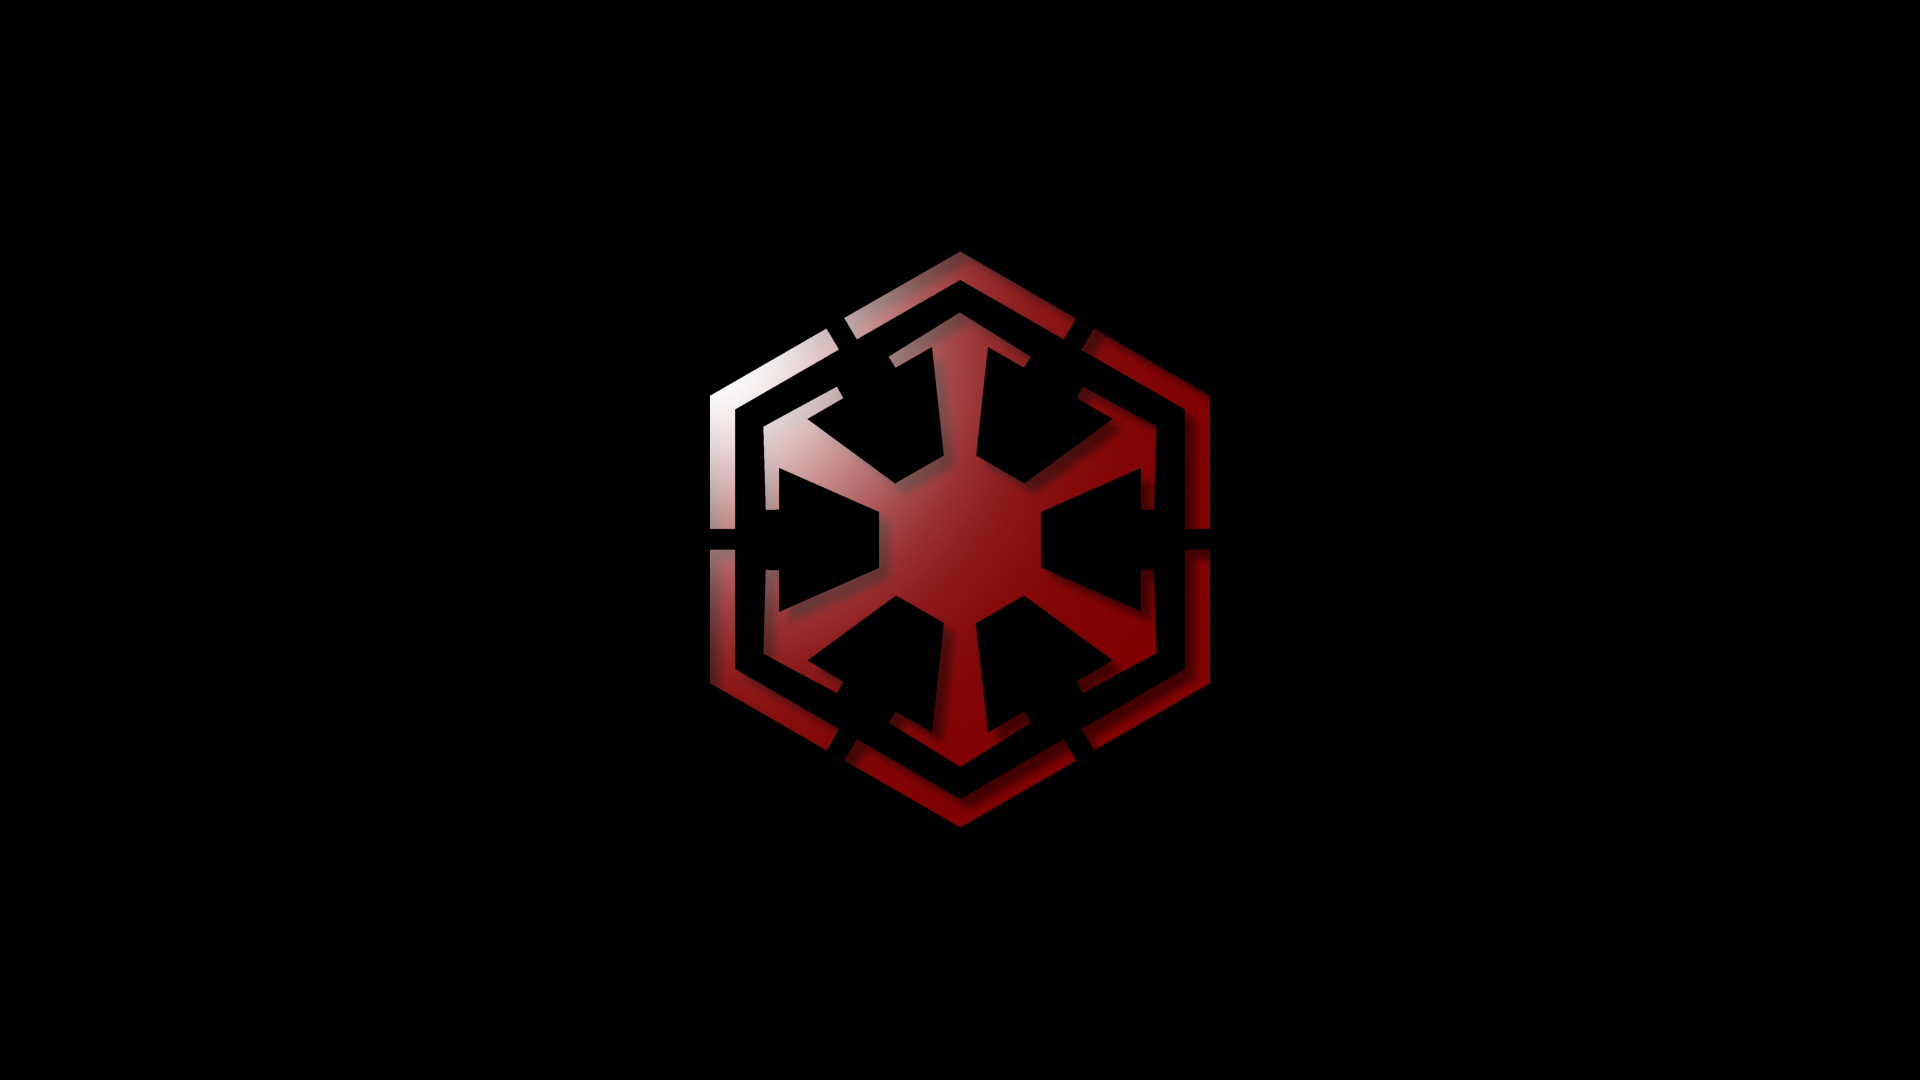 The Simple SWTOR Sith Wallpaper by DistantWanderer 1920x1080